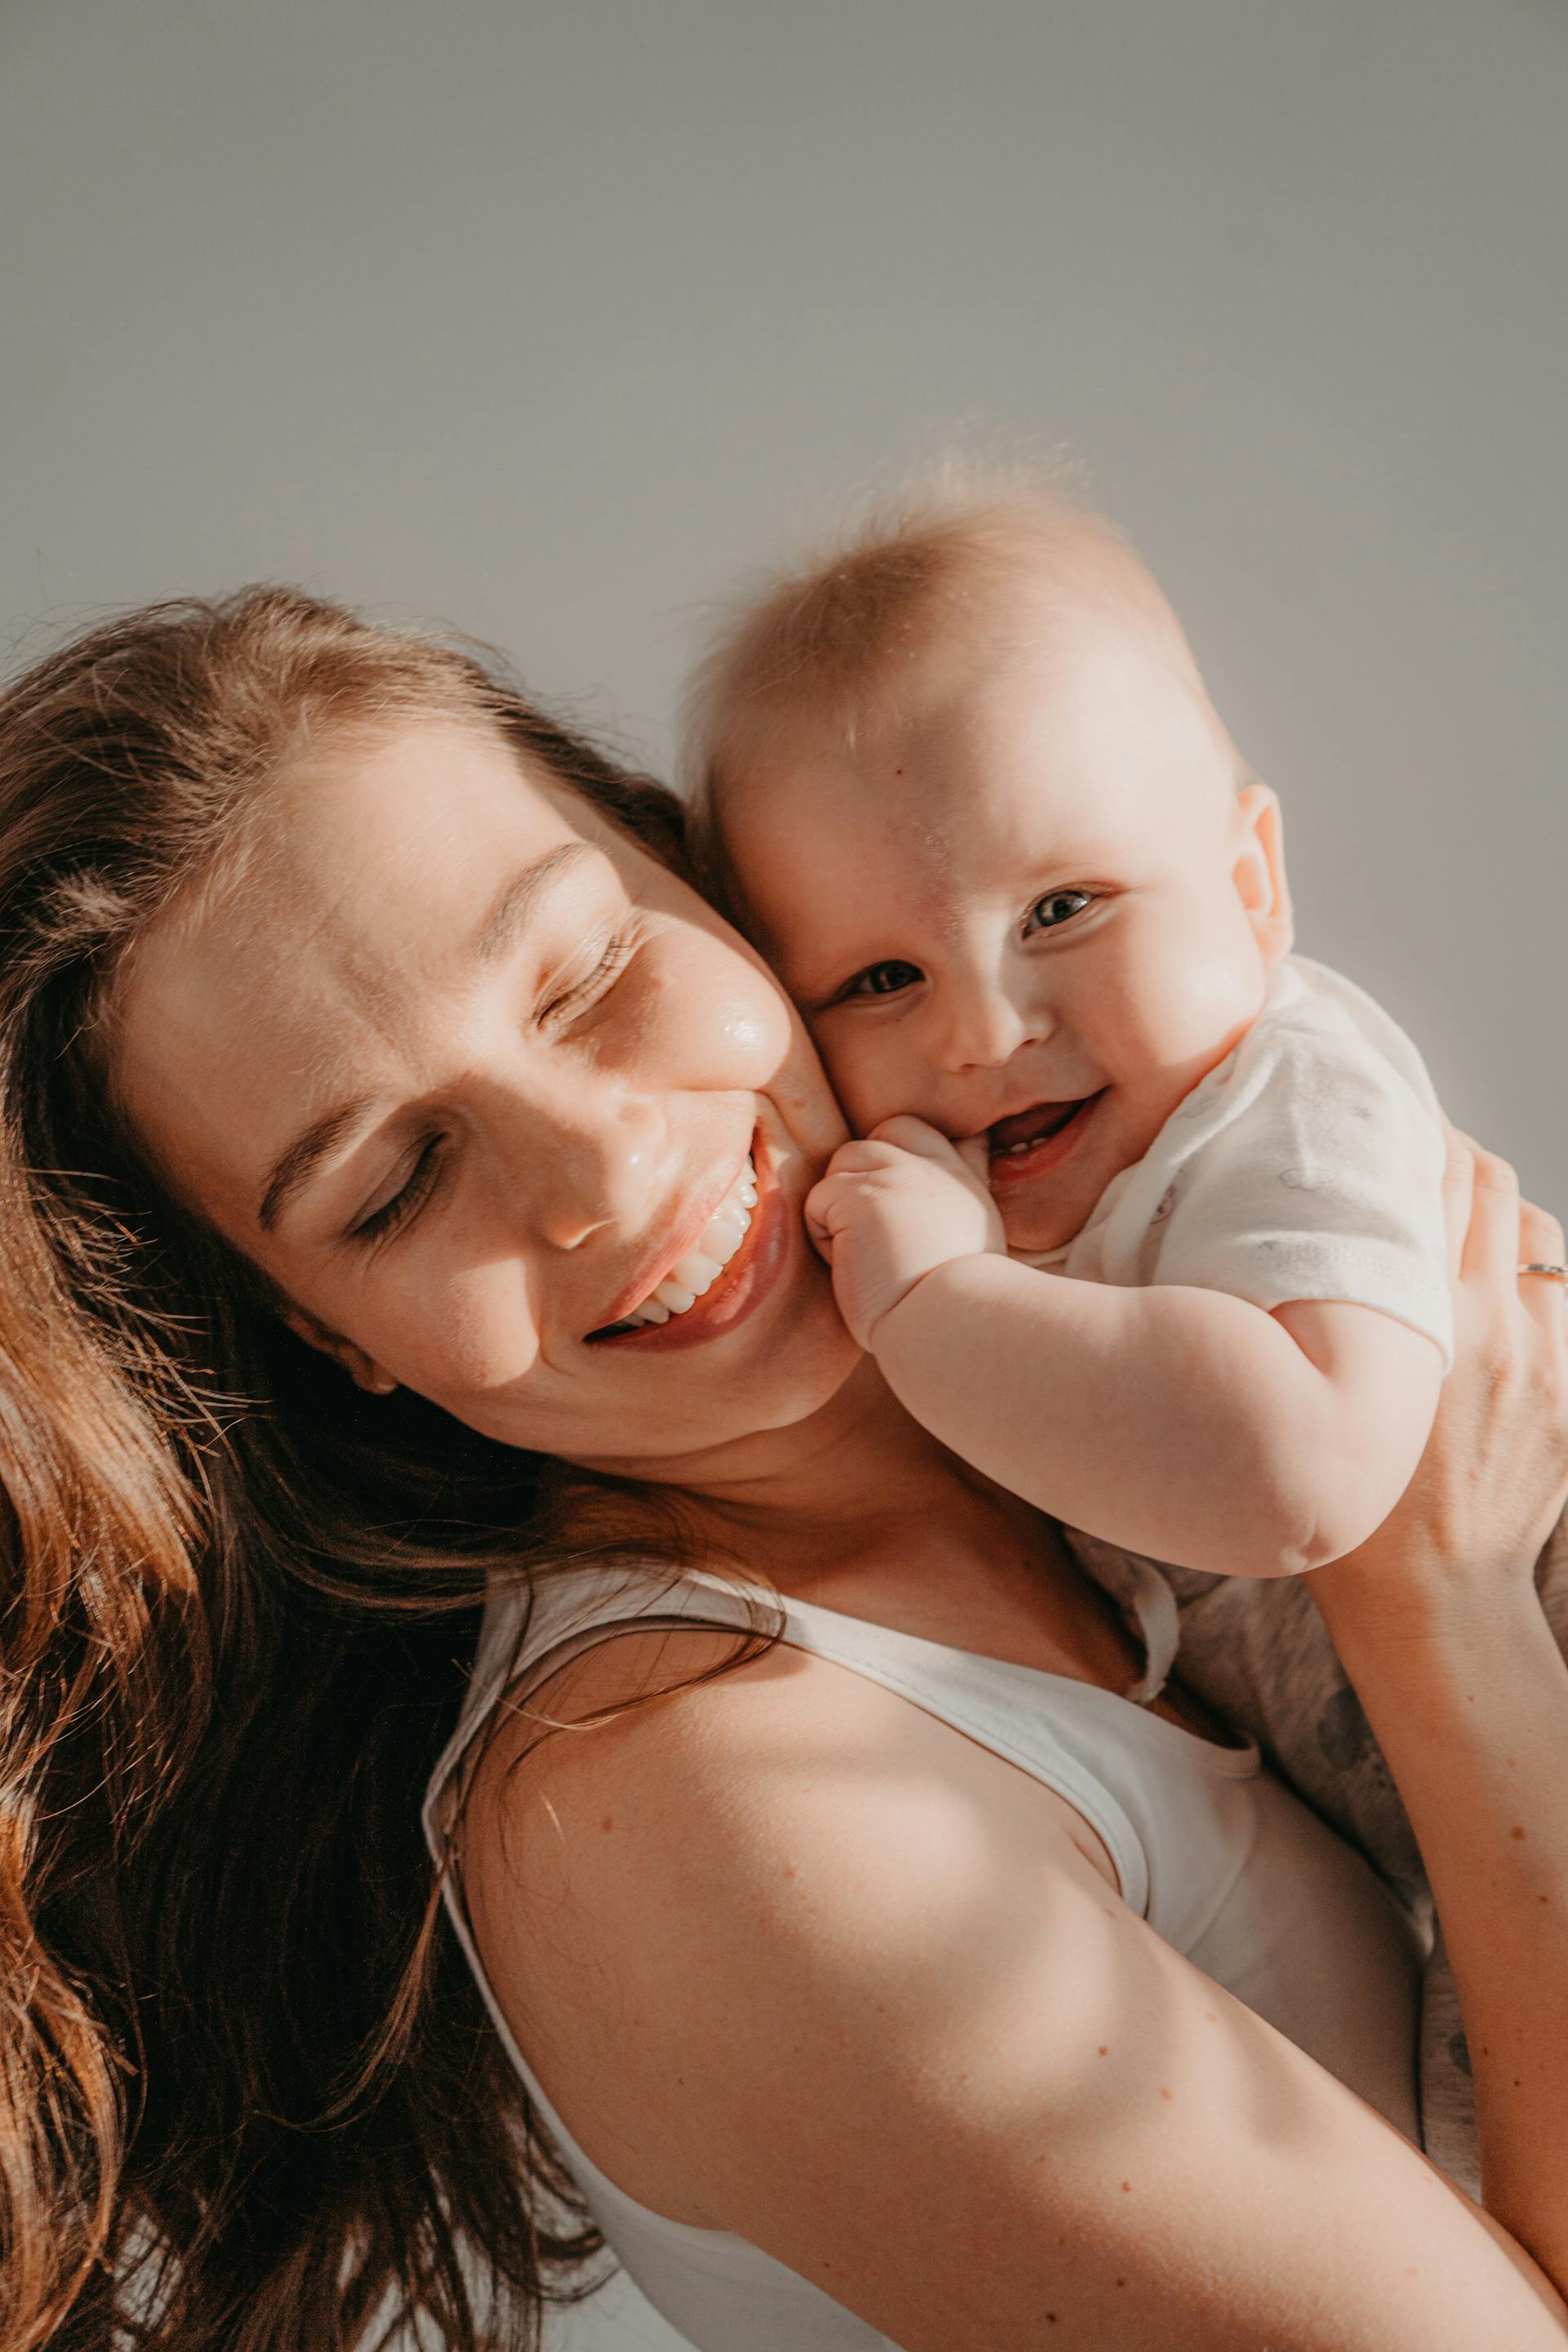 A happy woman holding a smiling baby | Source: Pexels